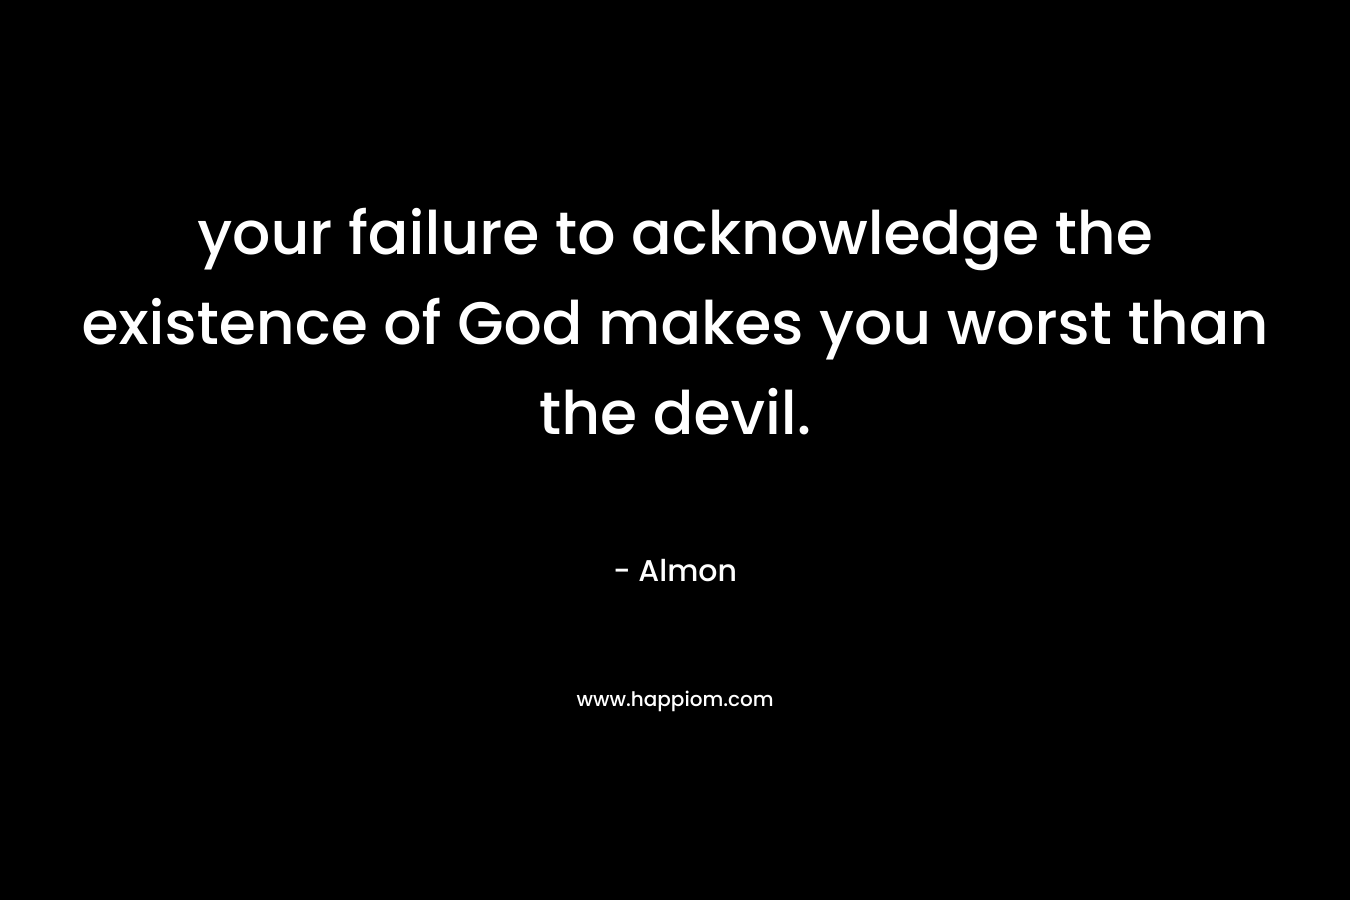 your failure to acknowledge the existence of God makes you worst than the devil. – Almon